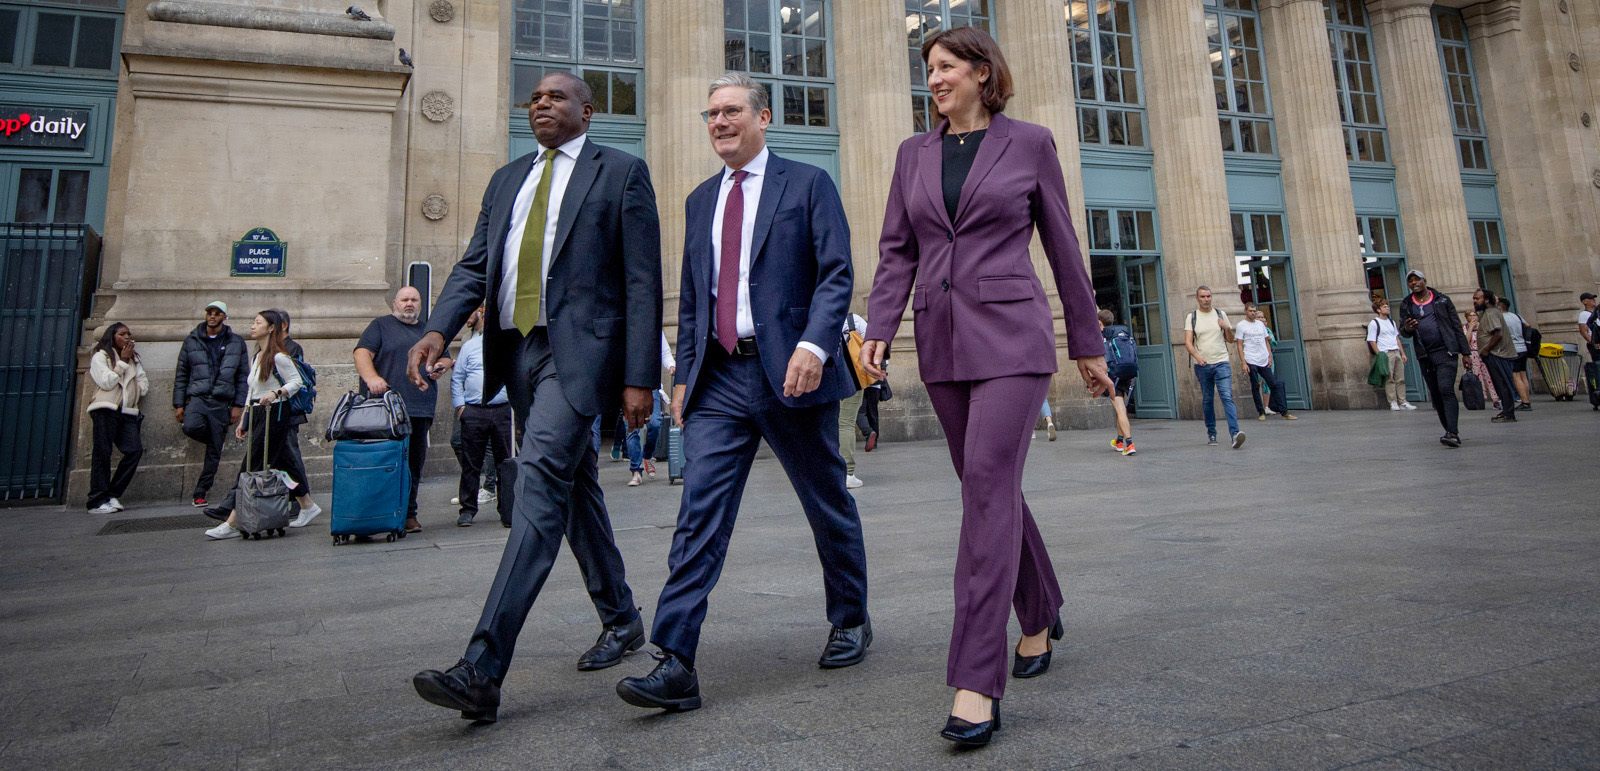 Labour leader Keir Starmer is pictured in Paris, France alongside the Shadow Foreign Secretary David Lammy and Shadow Chancellor of the Exchequer Rachel Reeves.